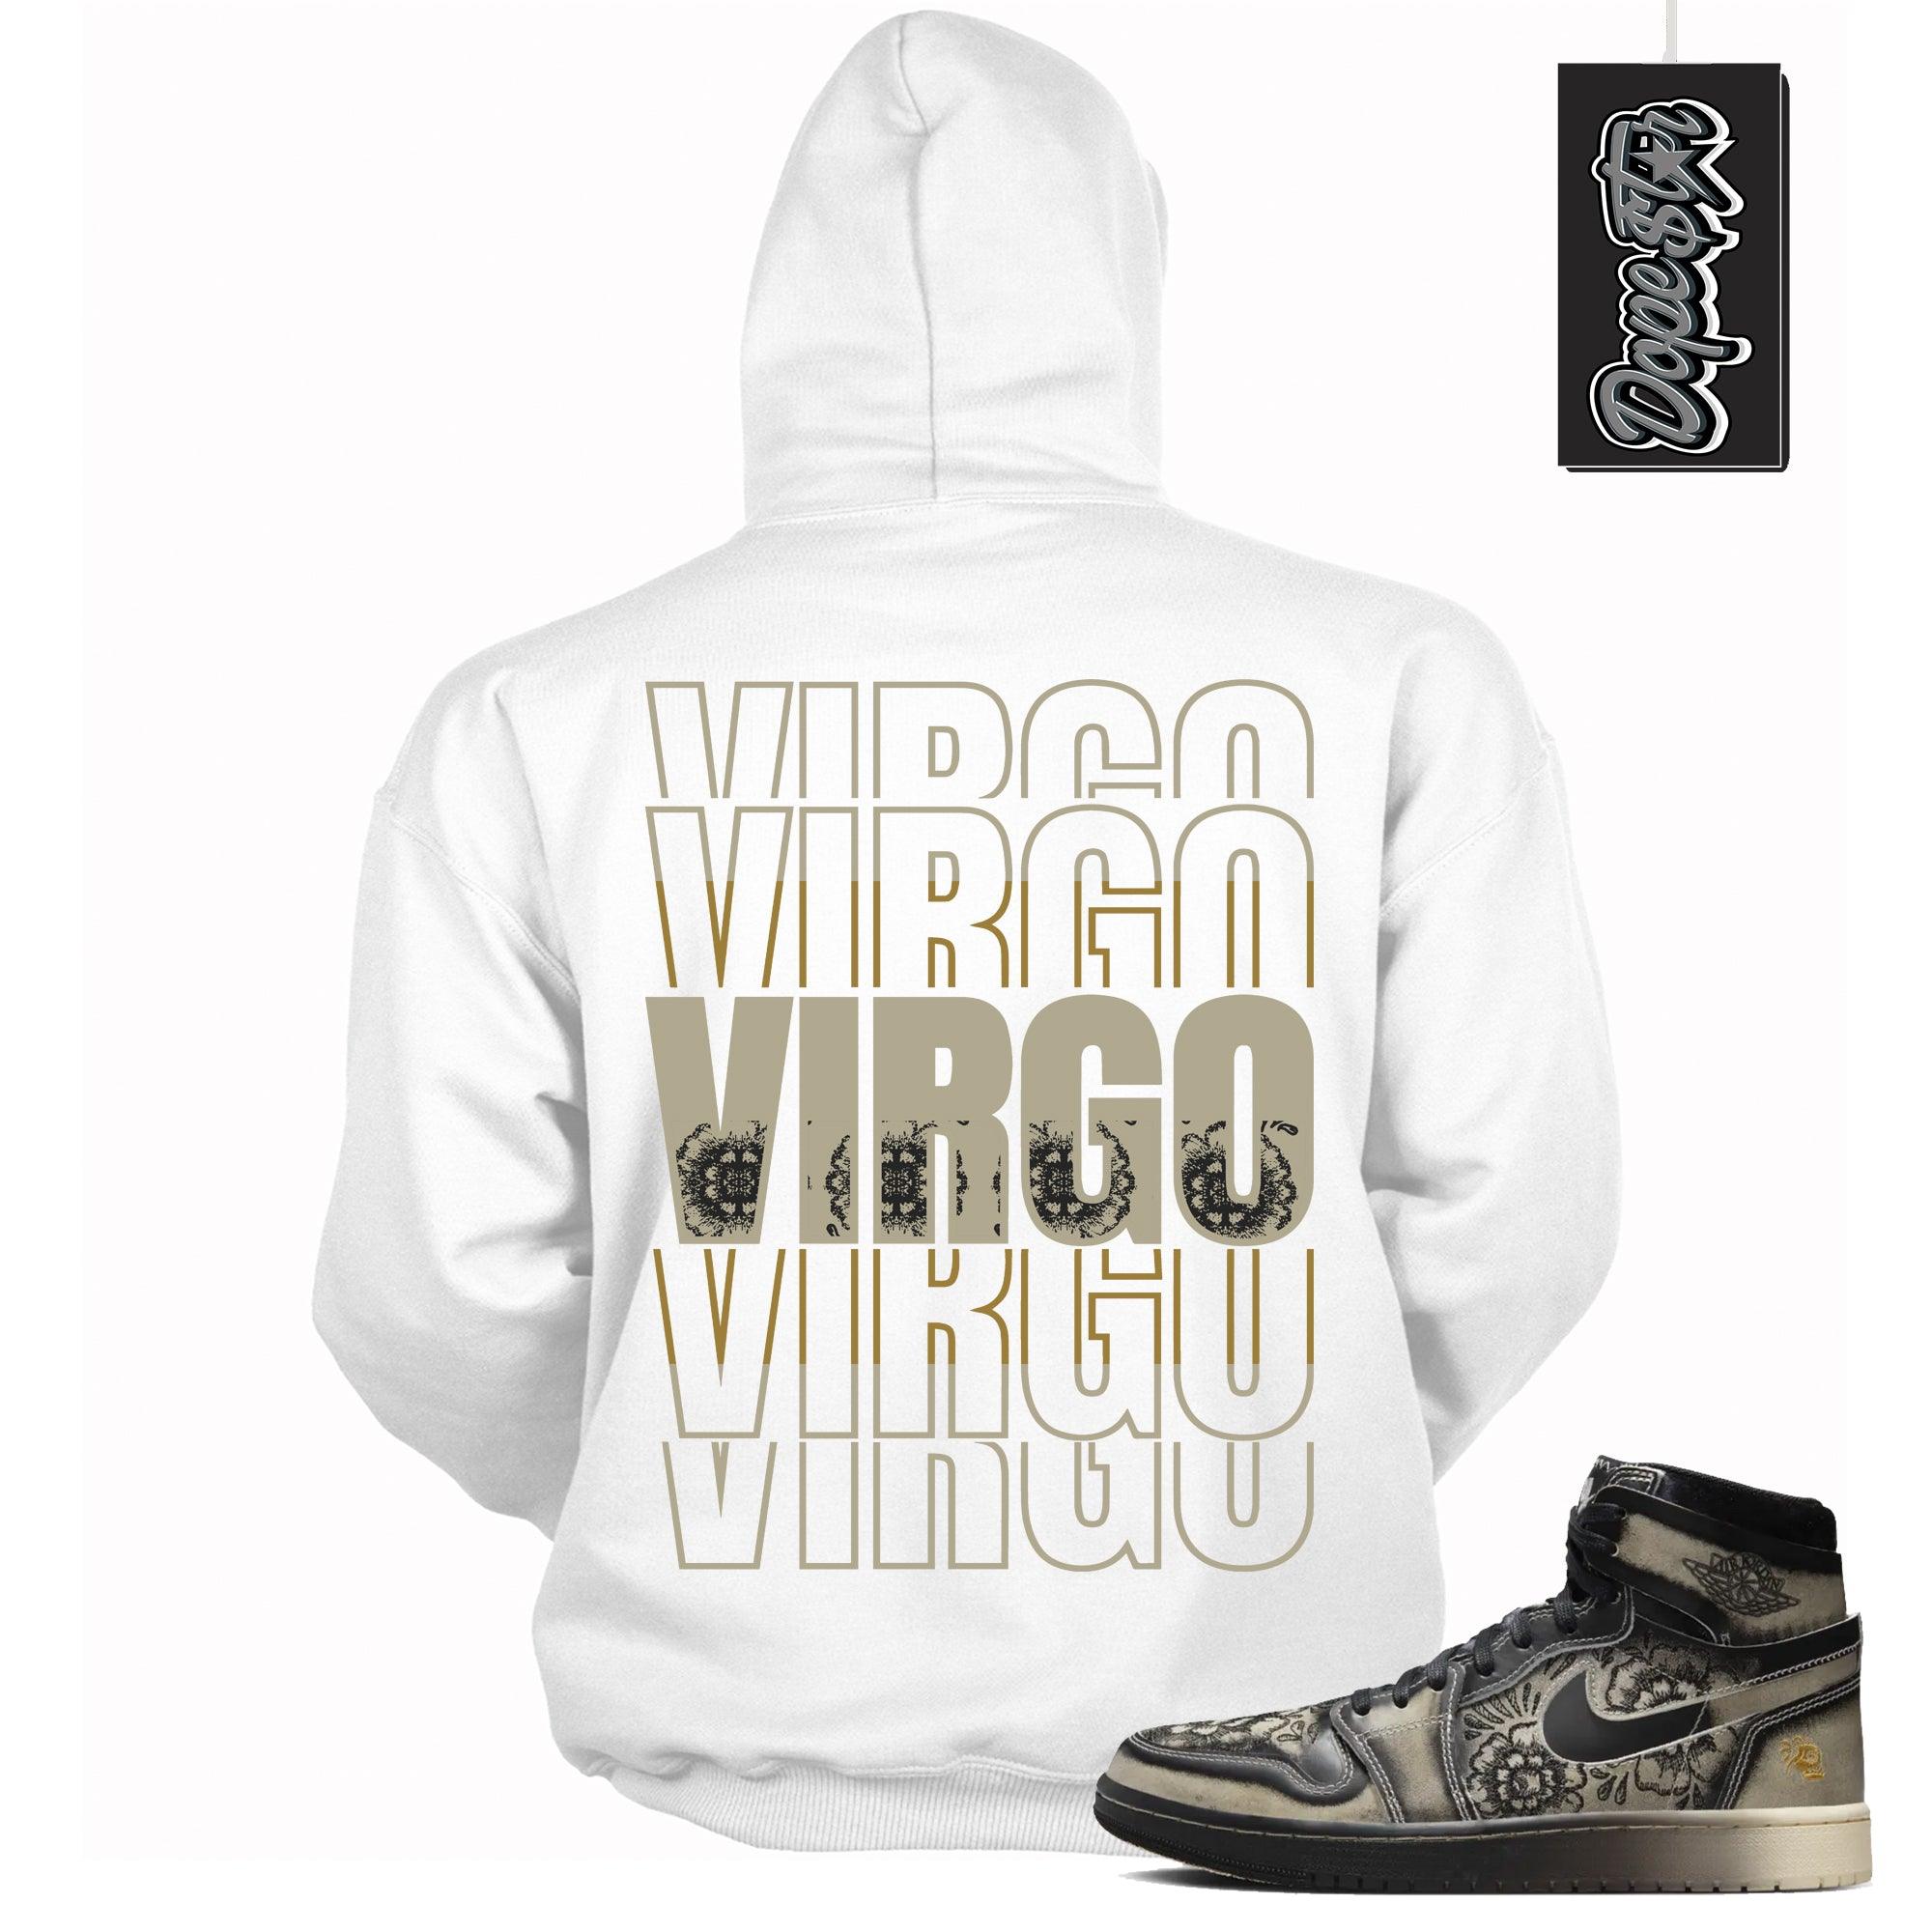 Cool White Graphic Hoodie with “ VIRGO “ print, that perfectly matches Air Jordan 1 High Zoom Comfort 2 Dia de Muertos Black and Pale Ivory sneakers